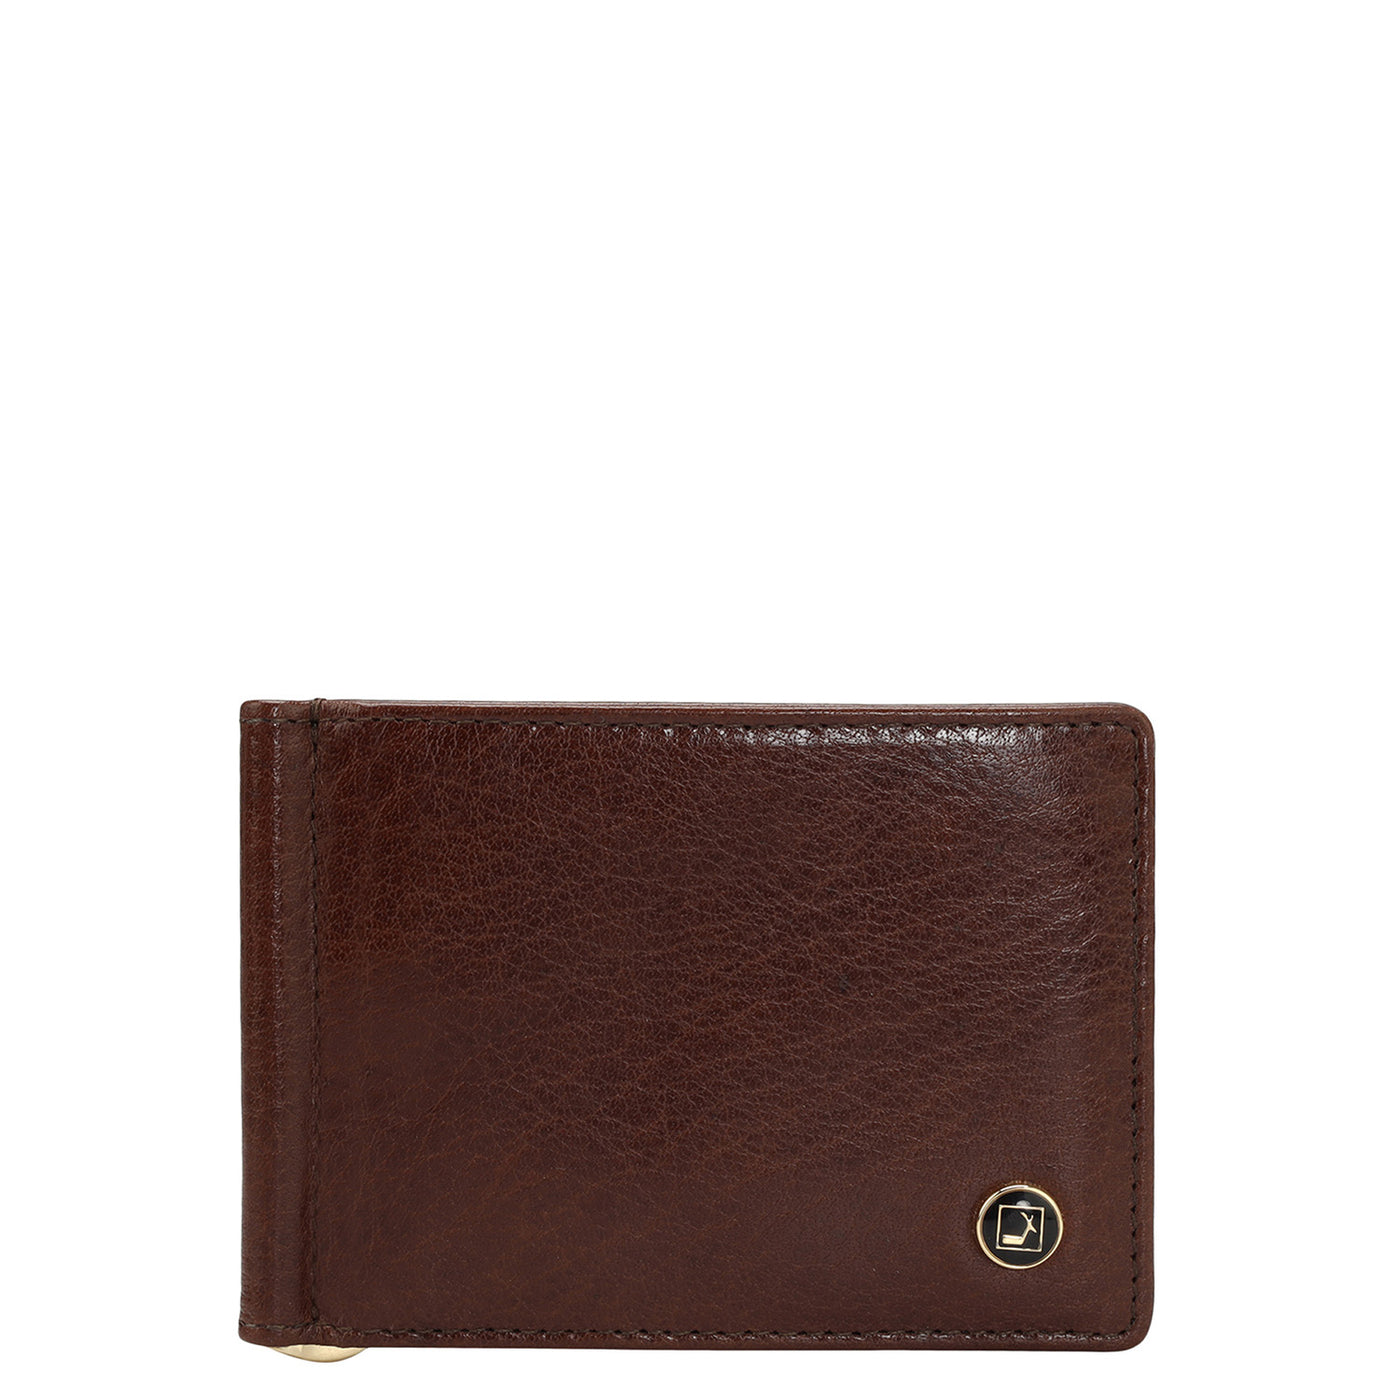 Elephant Pattern Leather Money Clip - Brown